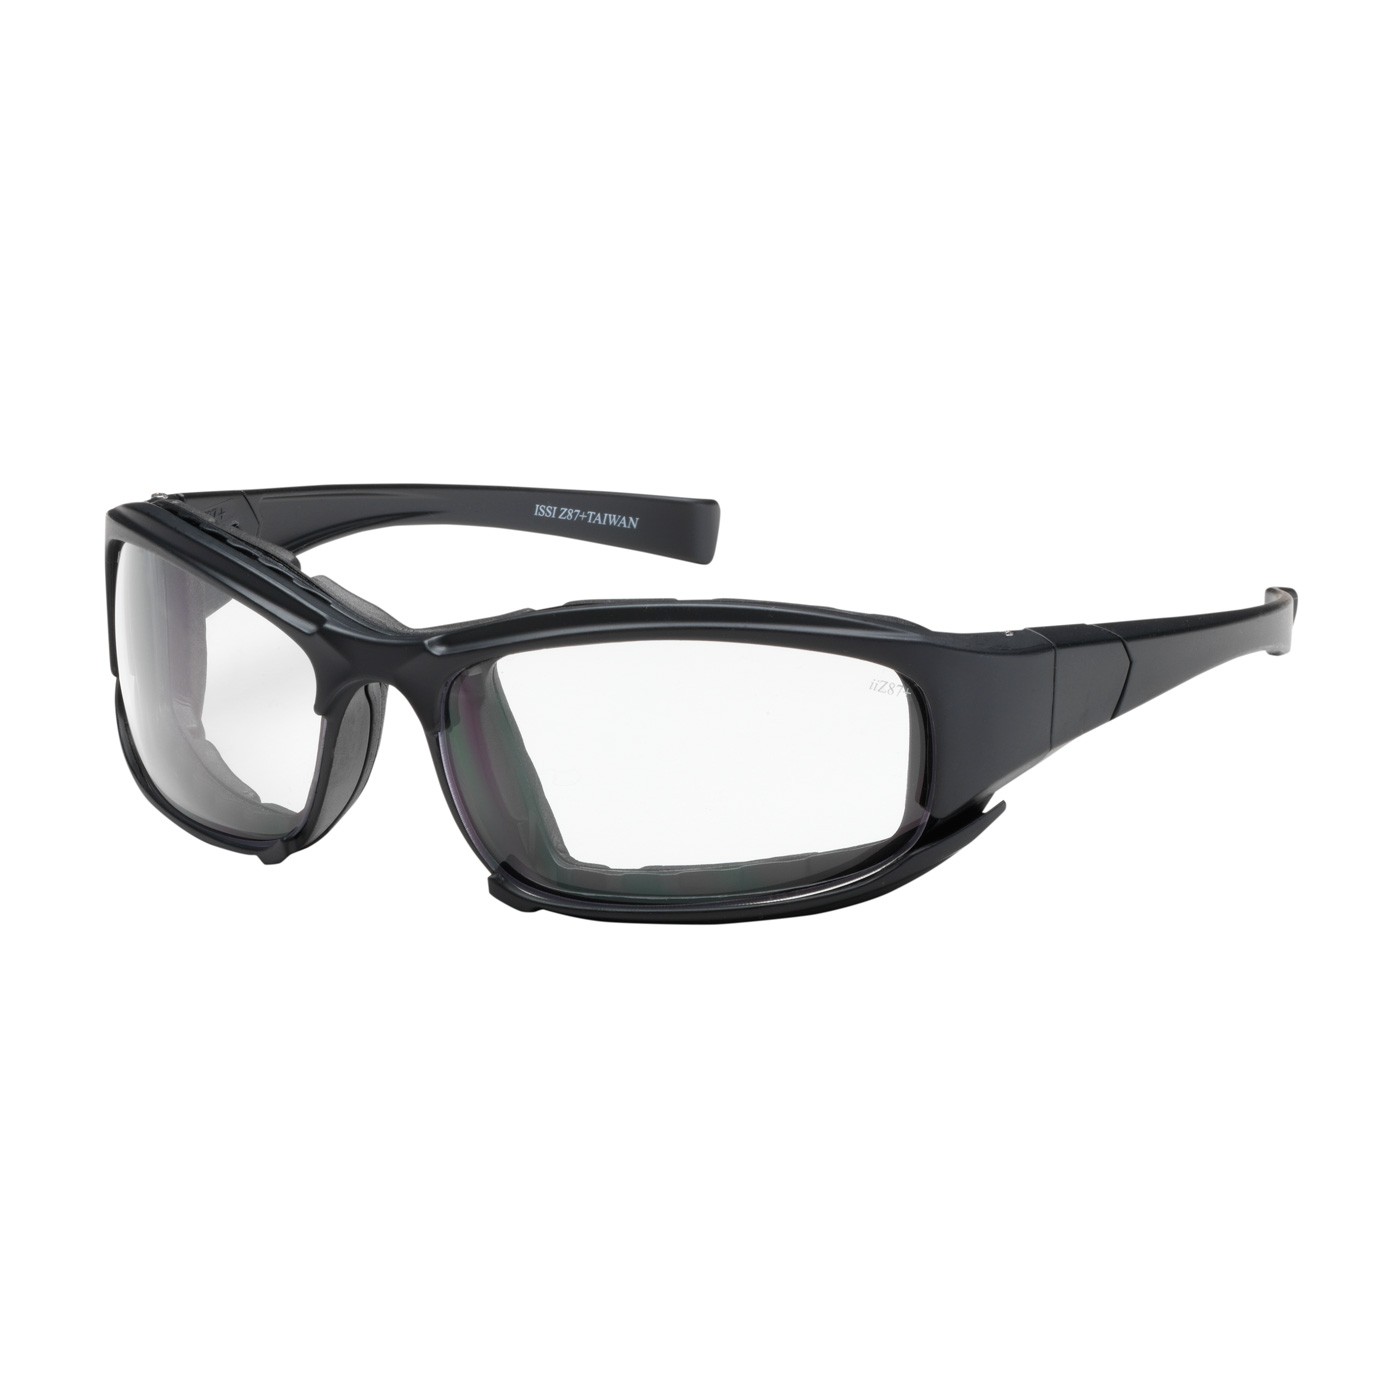 Cefiro™ Full Frame Safety Glasses with Black Frame, Rubber Foam Padding, Clear Lens and Anti-Scratch / Anti-Fog Coating  (#250-CE-10090)